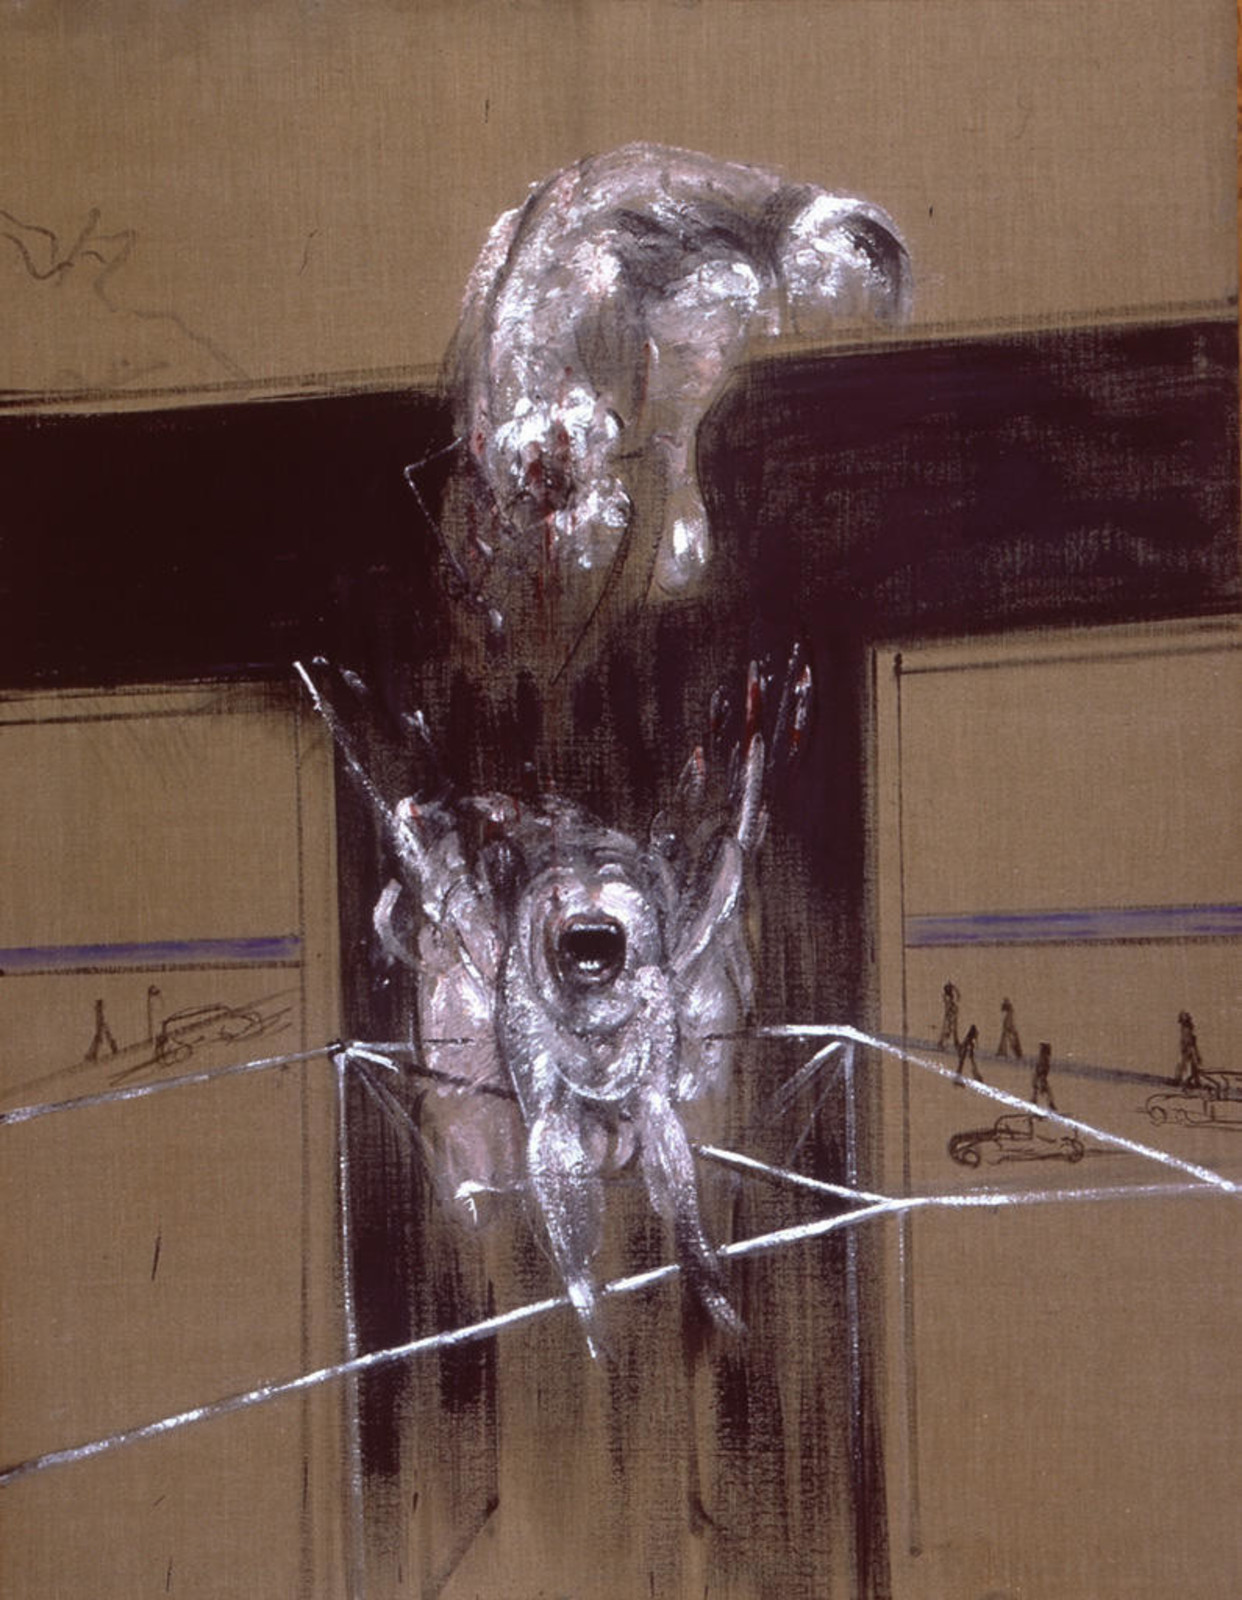 Francis Bacon. Fragment of a Crucifixion. 1950. Oil and cotton wool on canvas. 55 х 43 cm. Stedelijk Van Abbemuseum, Eindhoven